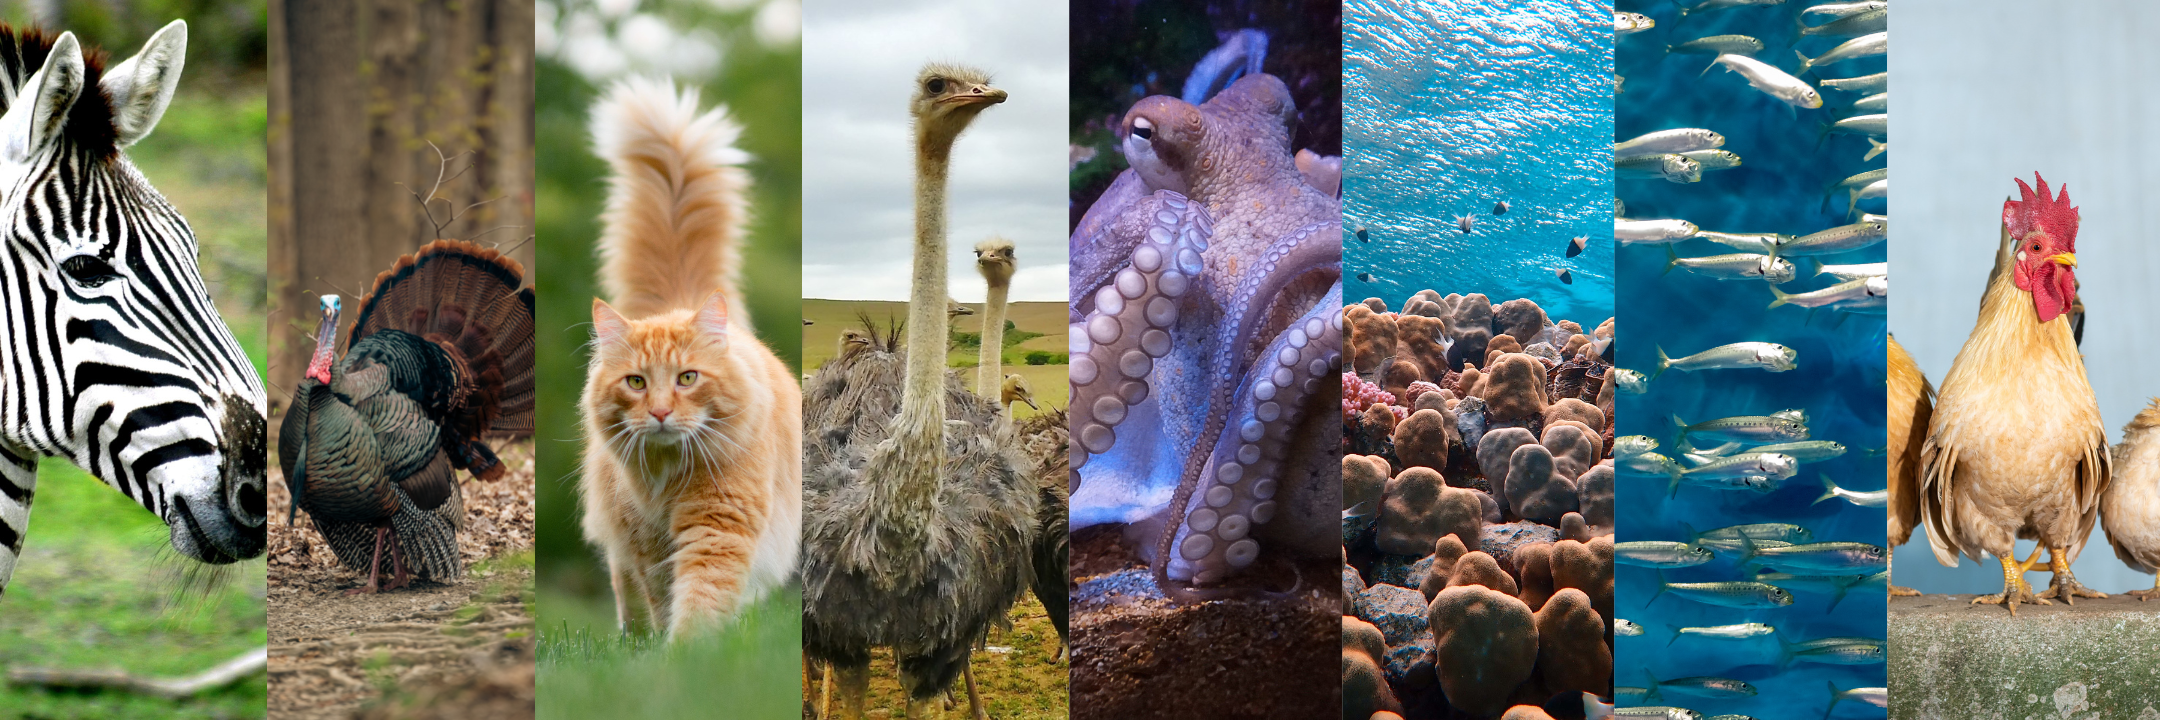 Pictures of a zebra, turkey, cat, ostrich, octopus, coral reef, school of fish, and chickens